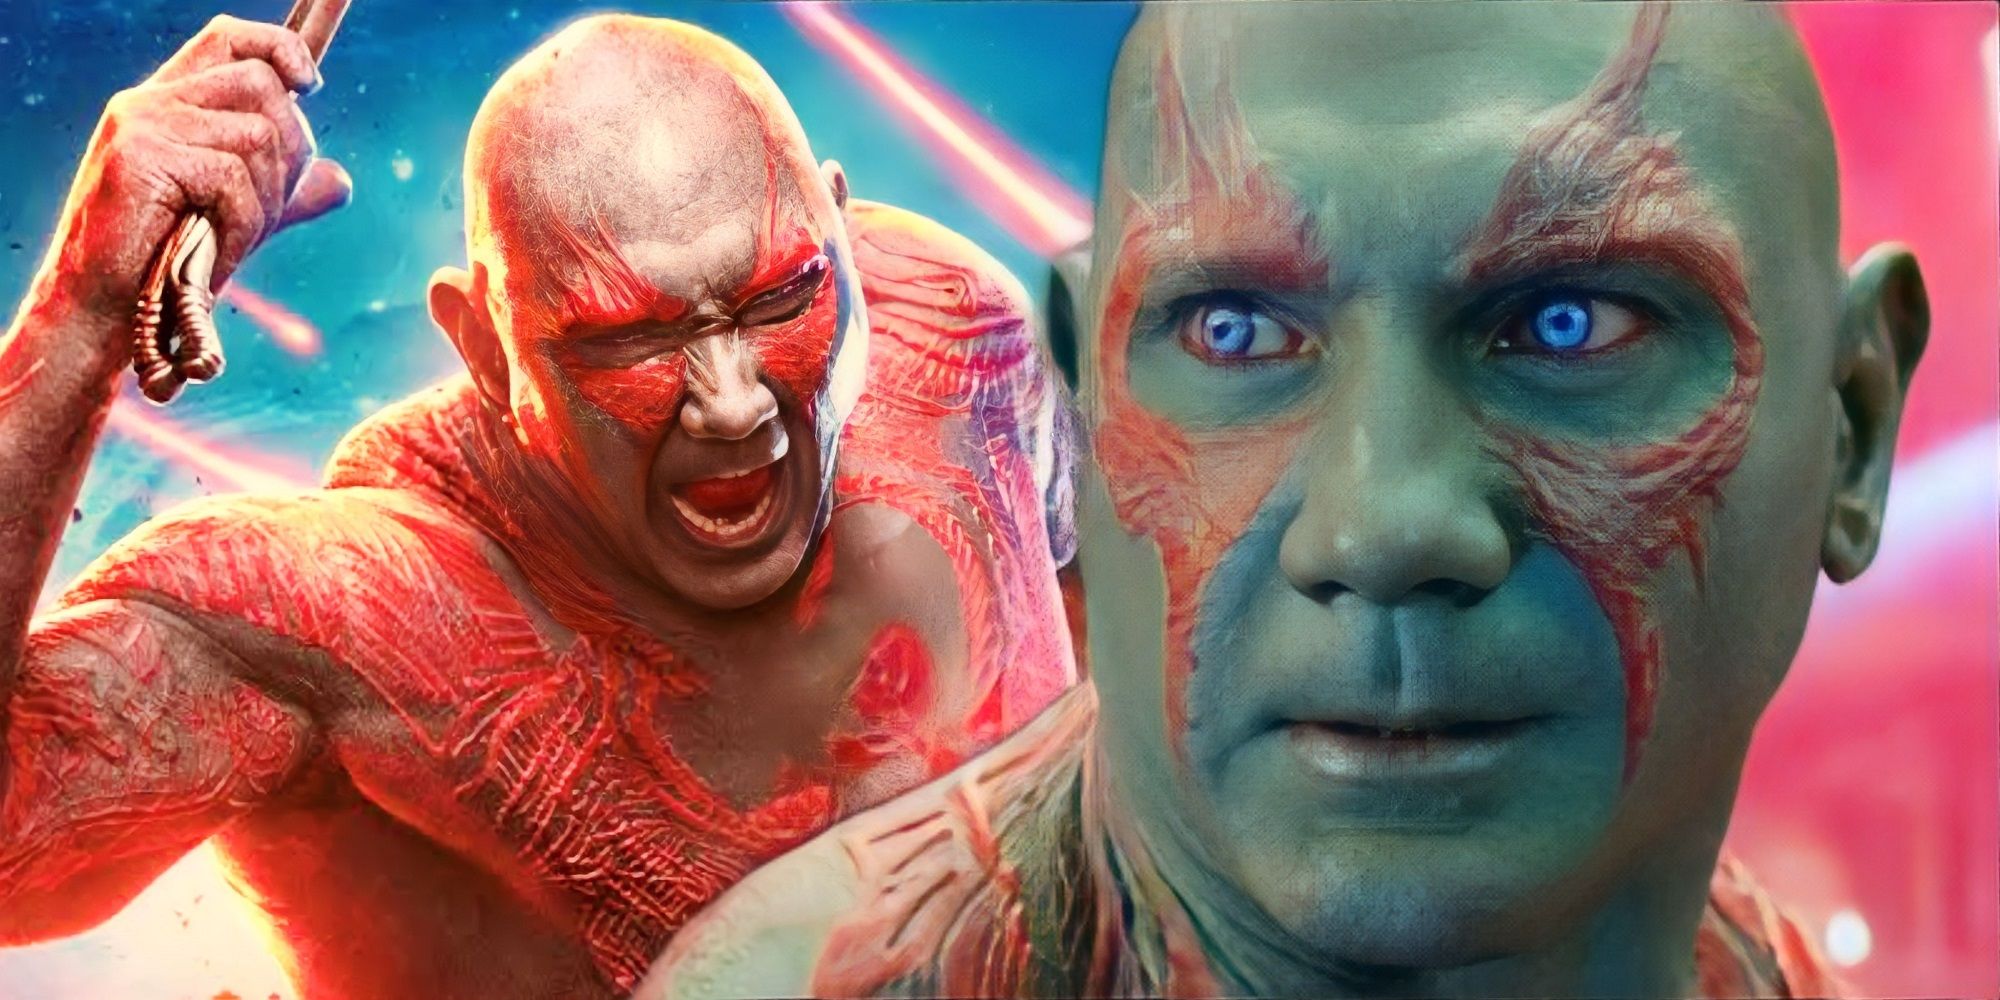 Dave Bautista as Drax the Destroyer in MCU's Guardians of the Galaxy